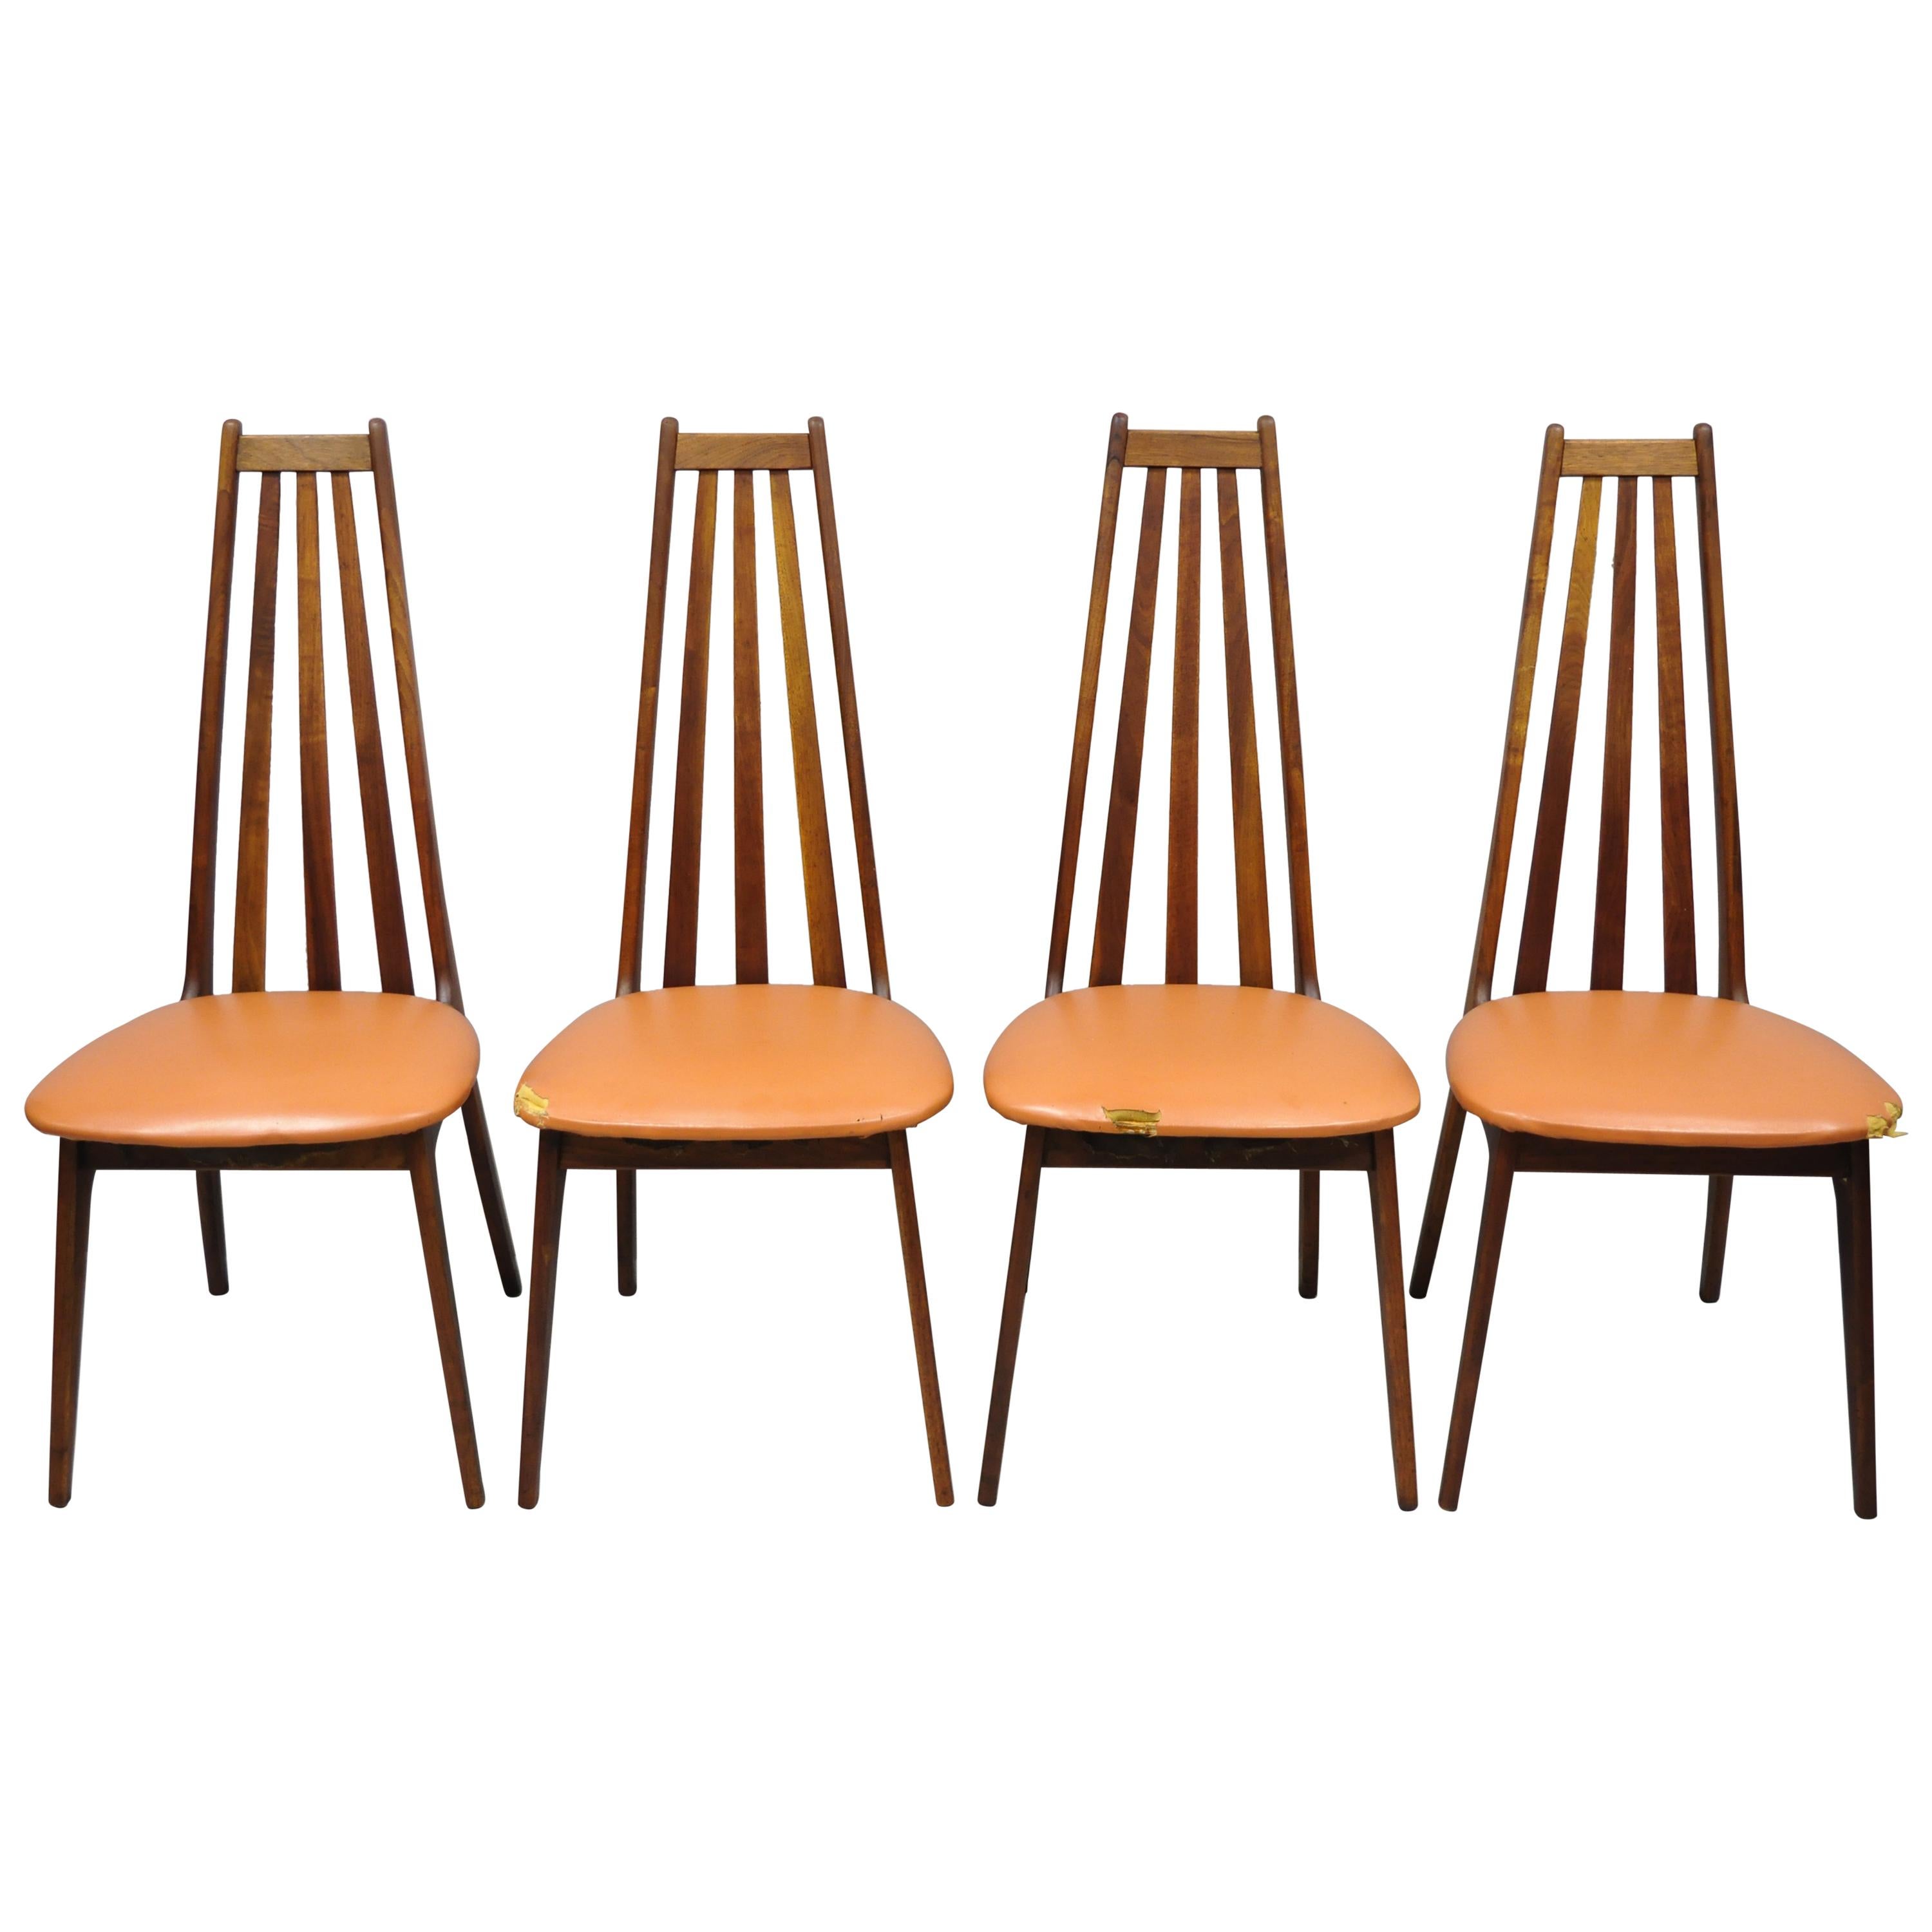 4 Tall Back Vintage Danish Modern Teak Wood Dining Chairs after Adrian Pearsall